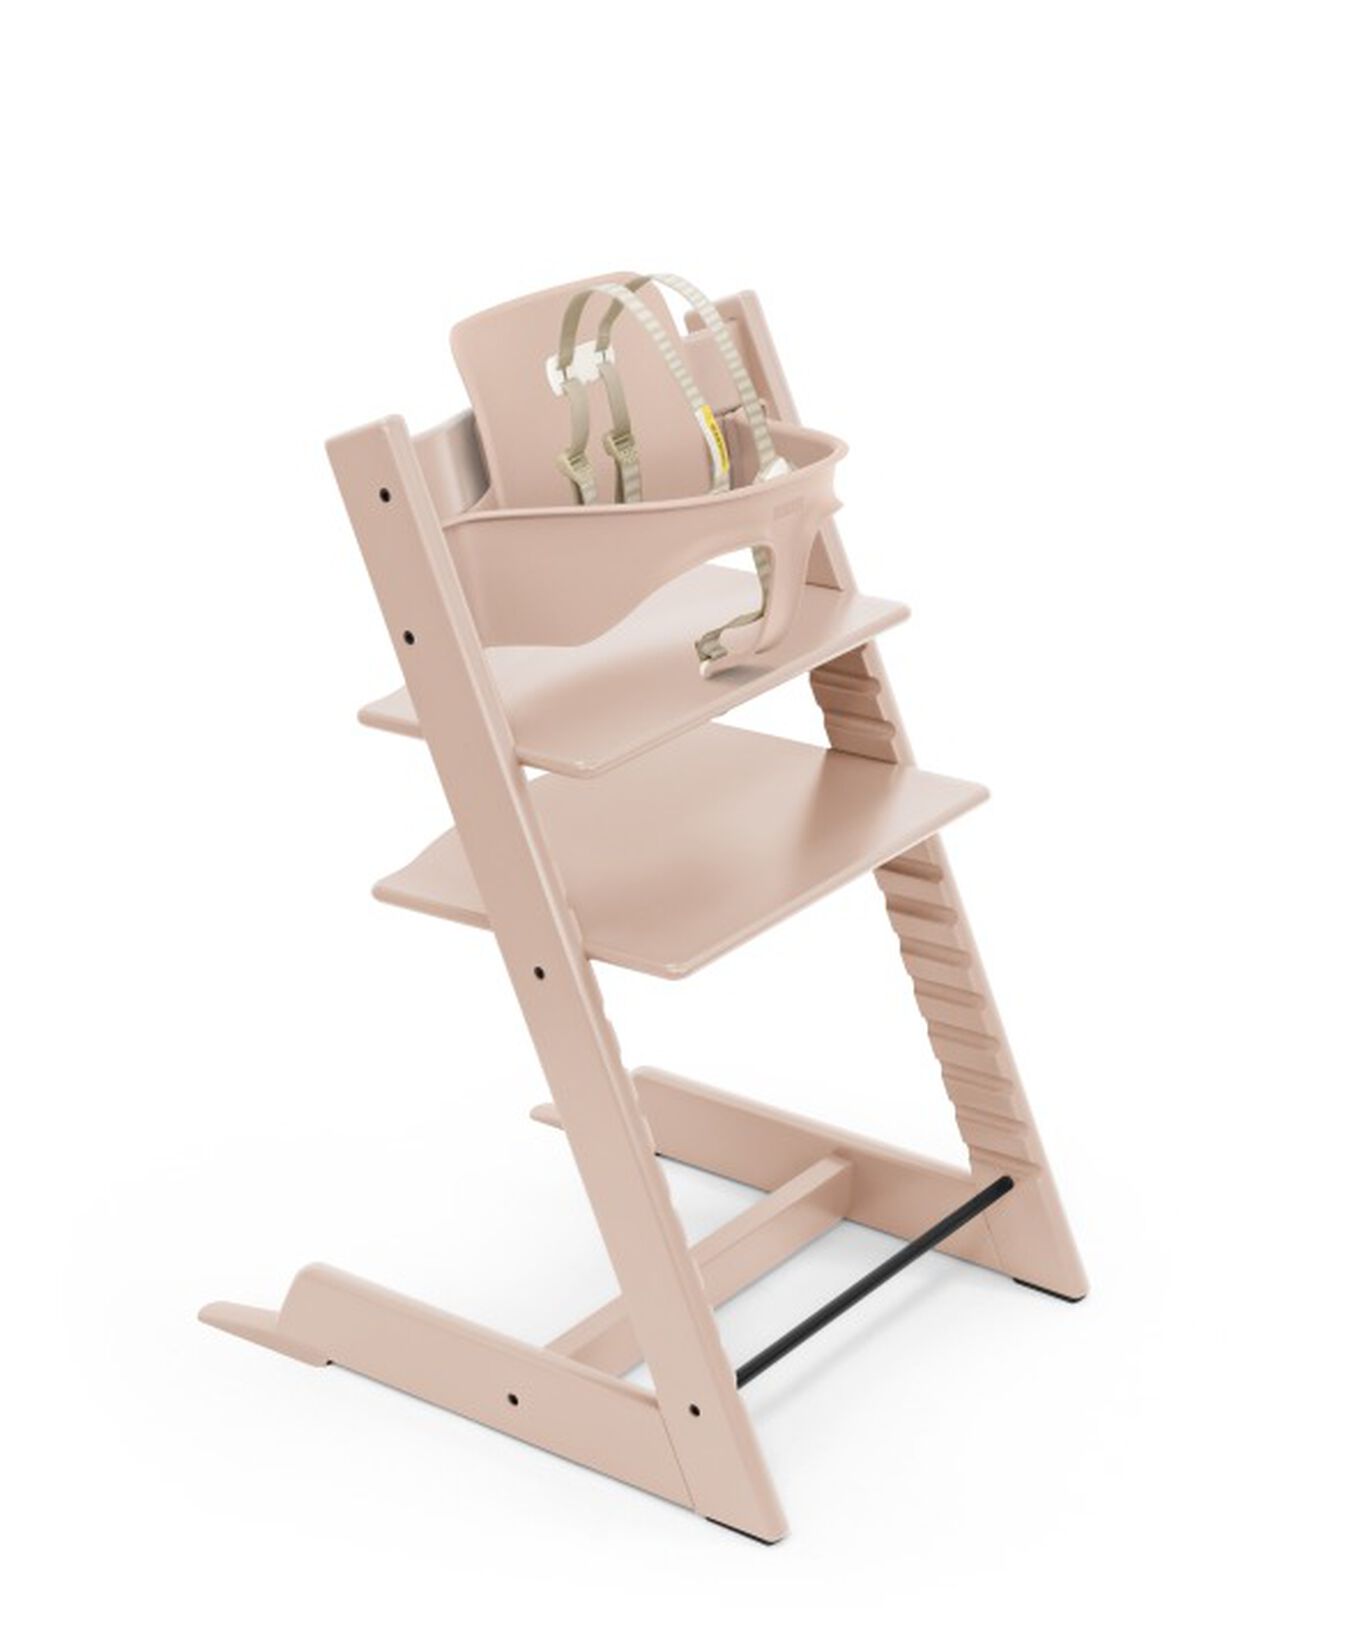 Tripp Trapp® chair Serene Pink, Beech Wood, with Baby Set. US version. view 3